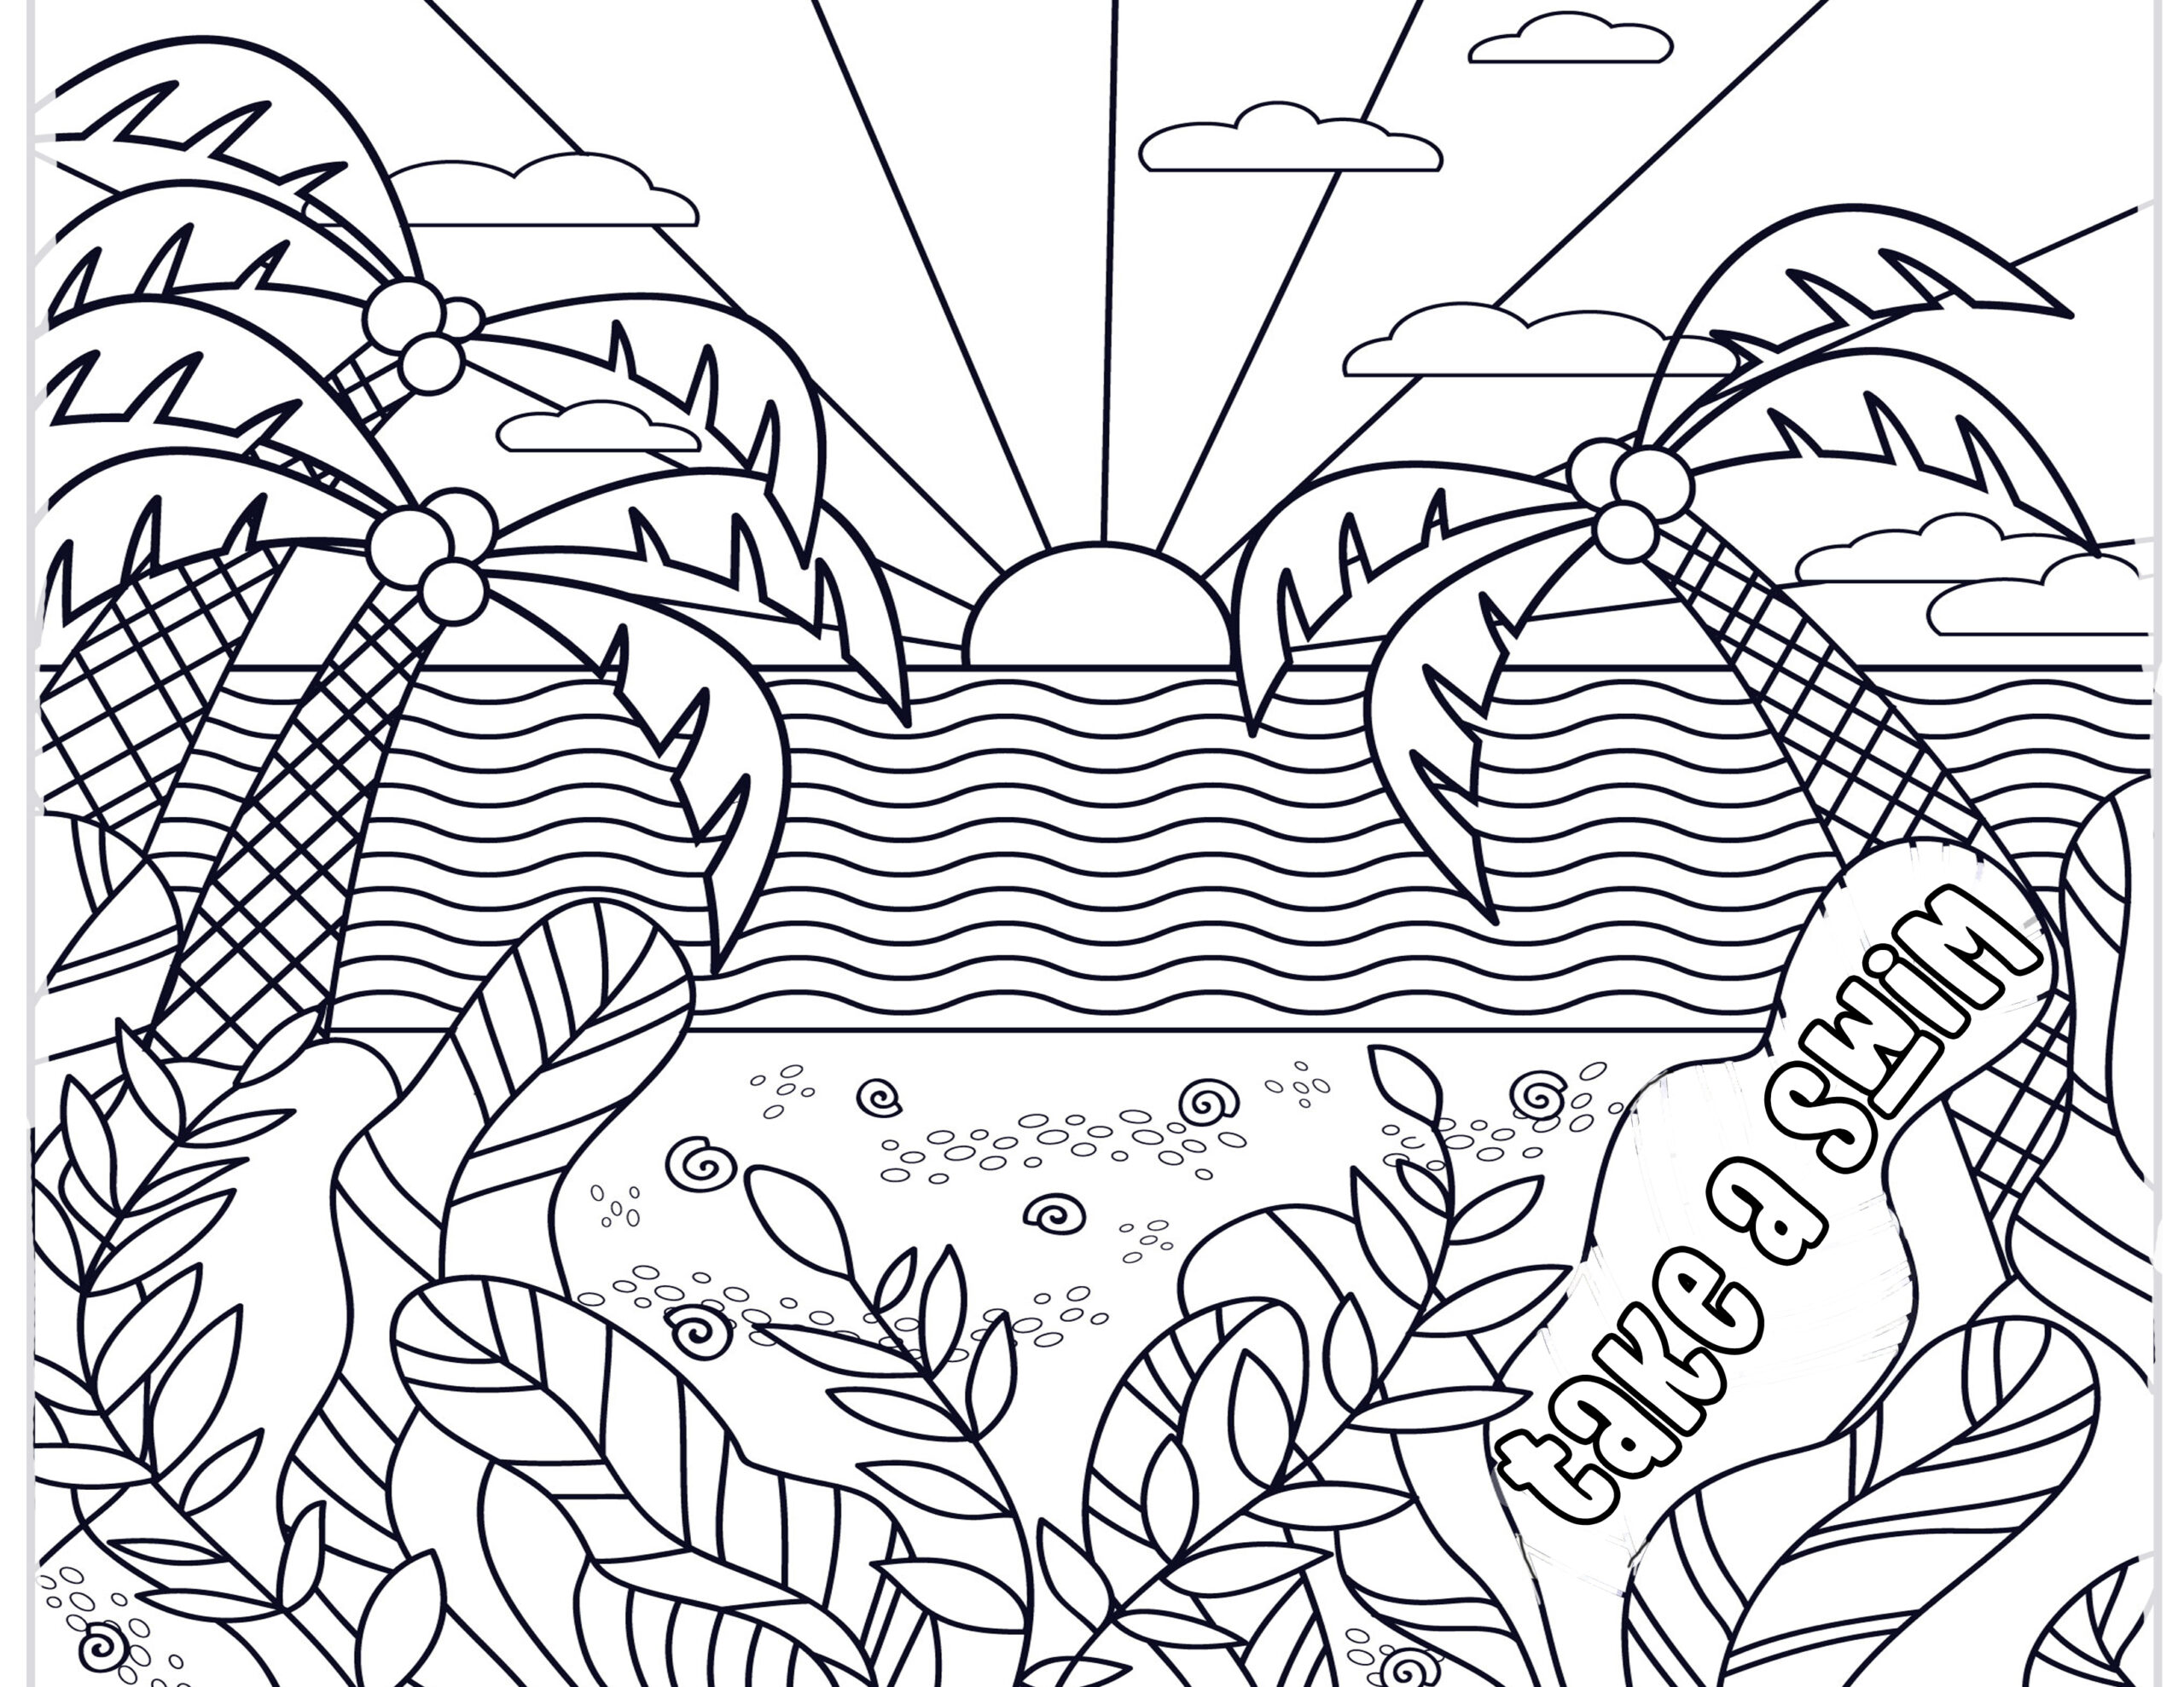 favorite-pastimes-coloring-pages-summer-fun-inkhappi